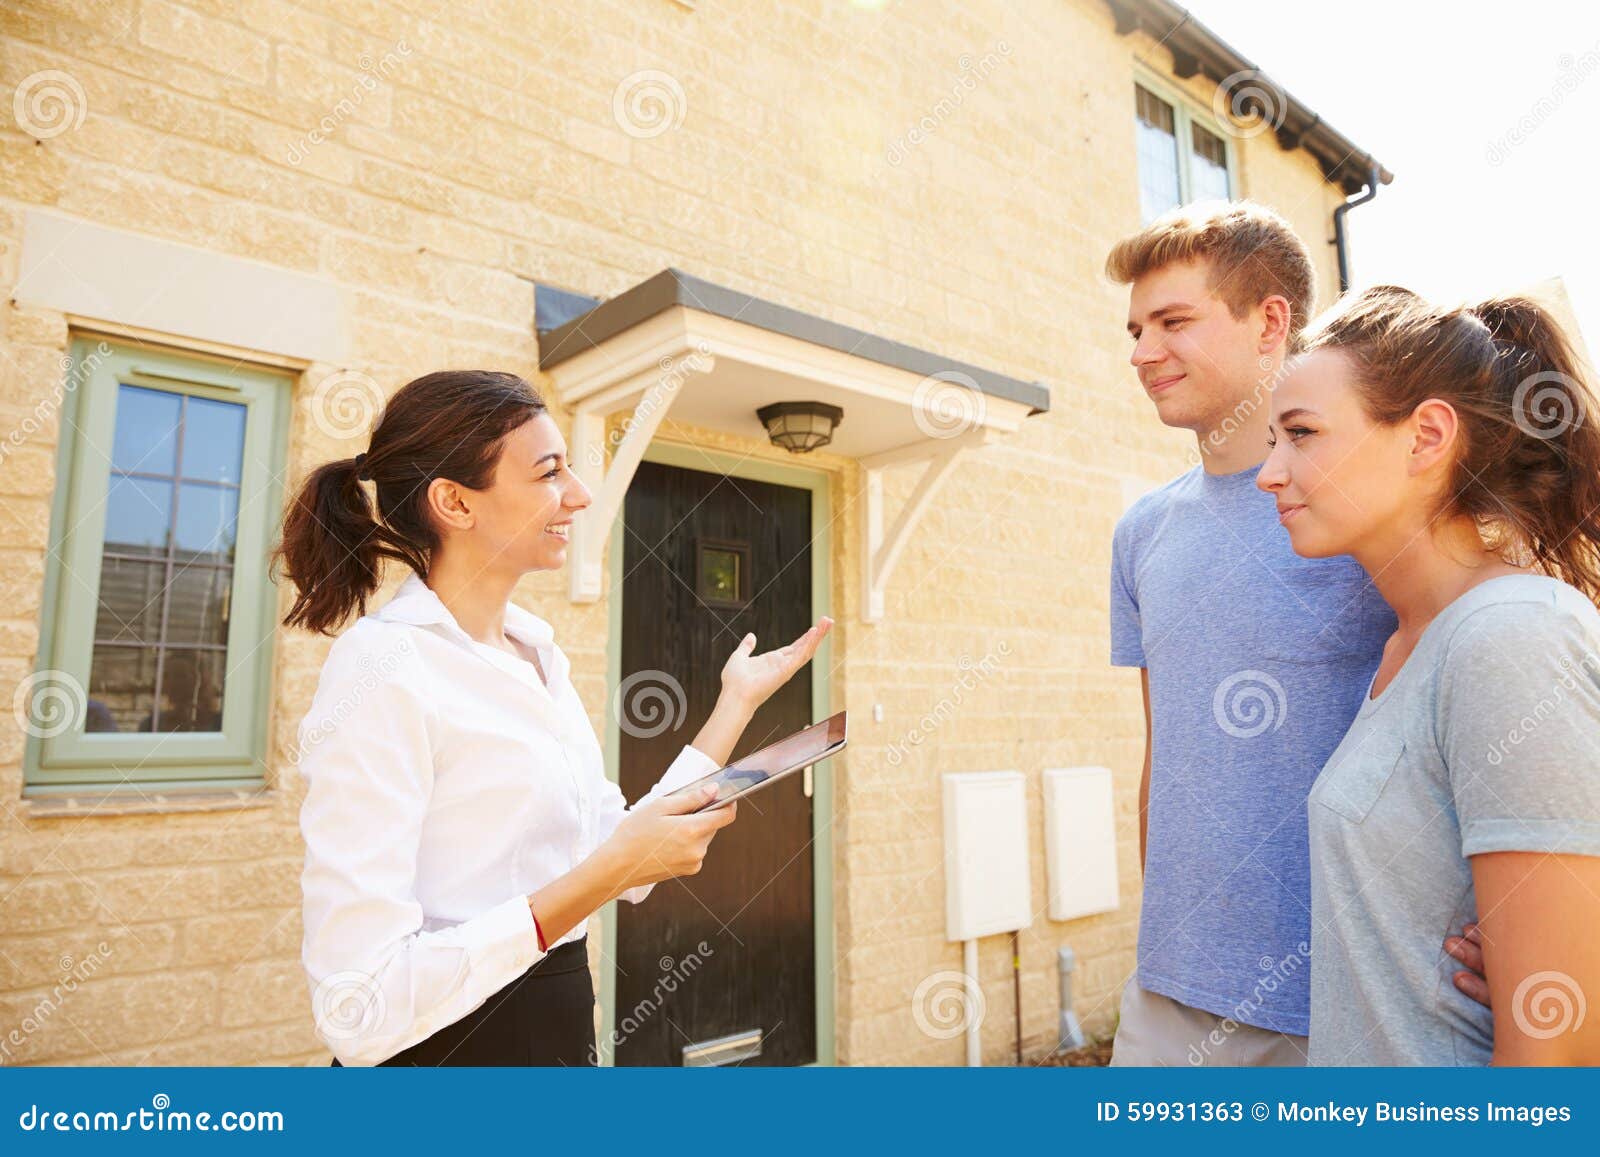 young couple viewing a house with female real estate agent